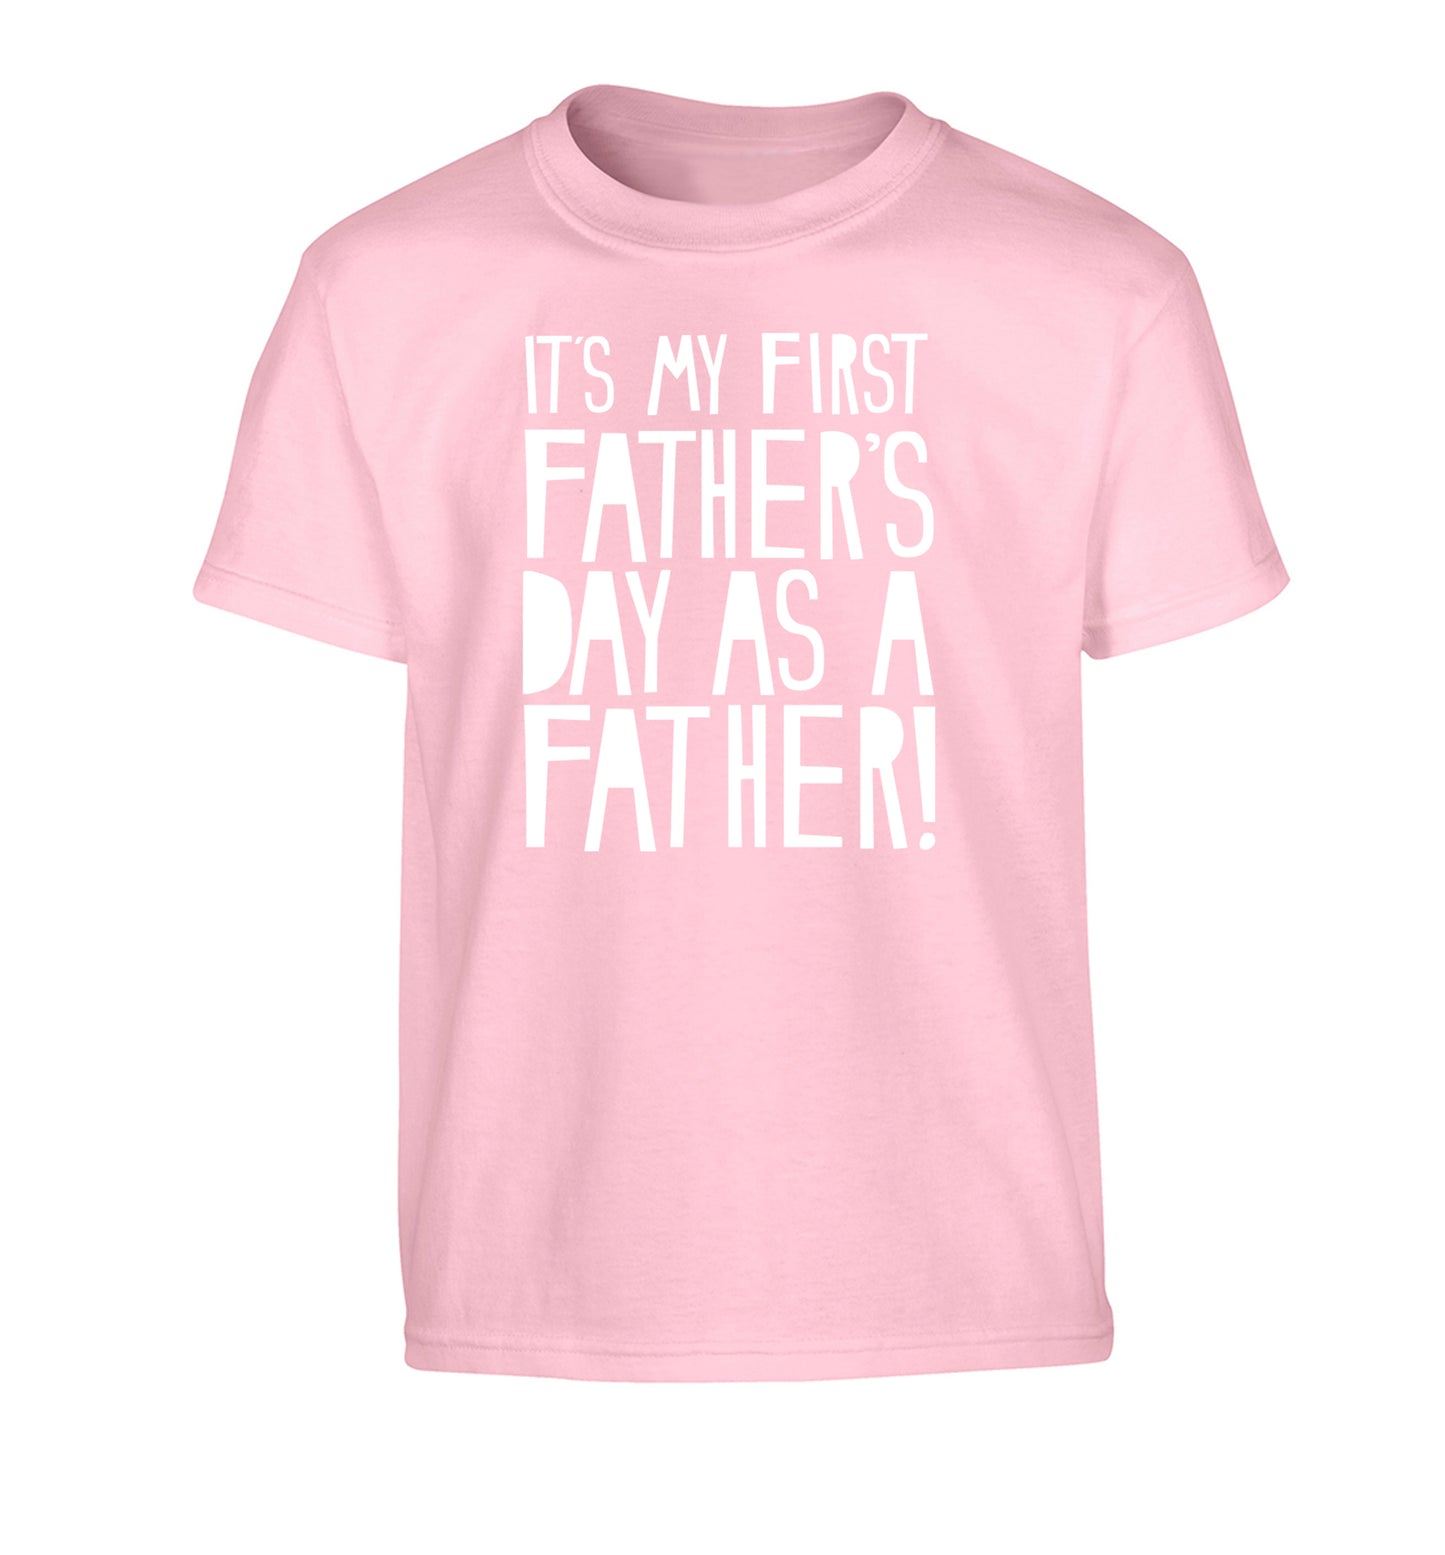 It's my first Father's Day as a father! Children's light pink Tshirt 12-13 Years